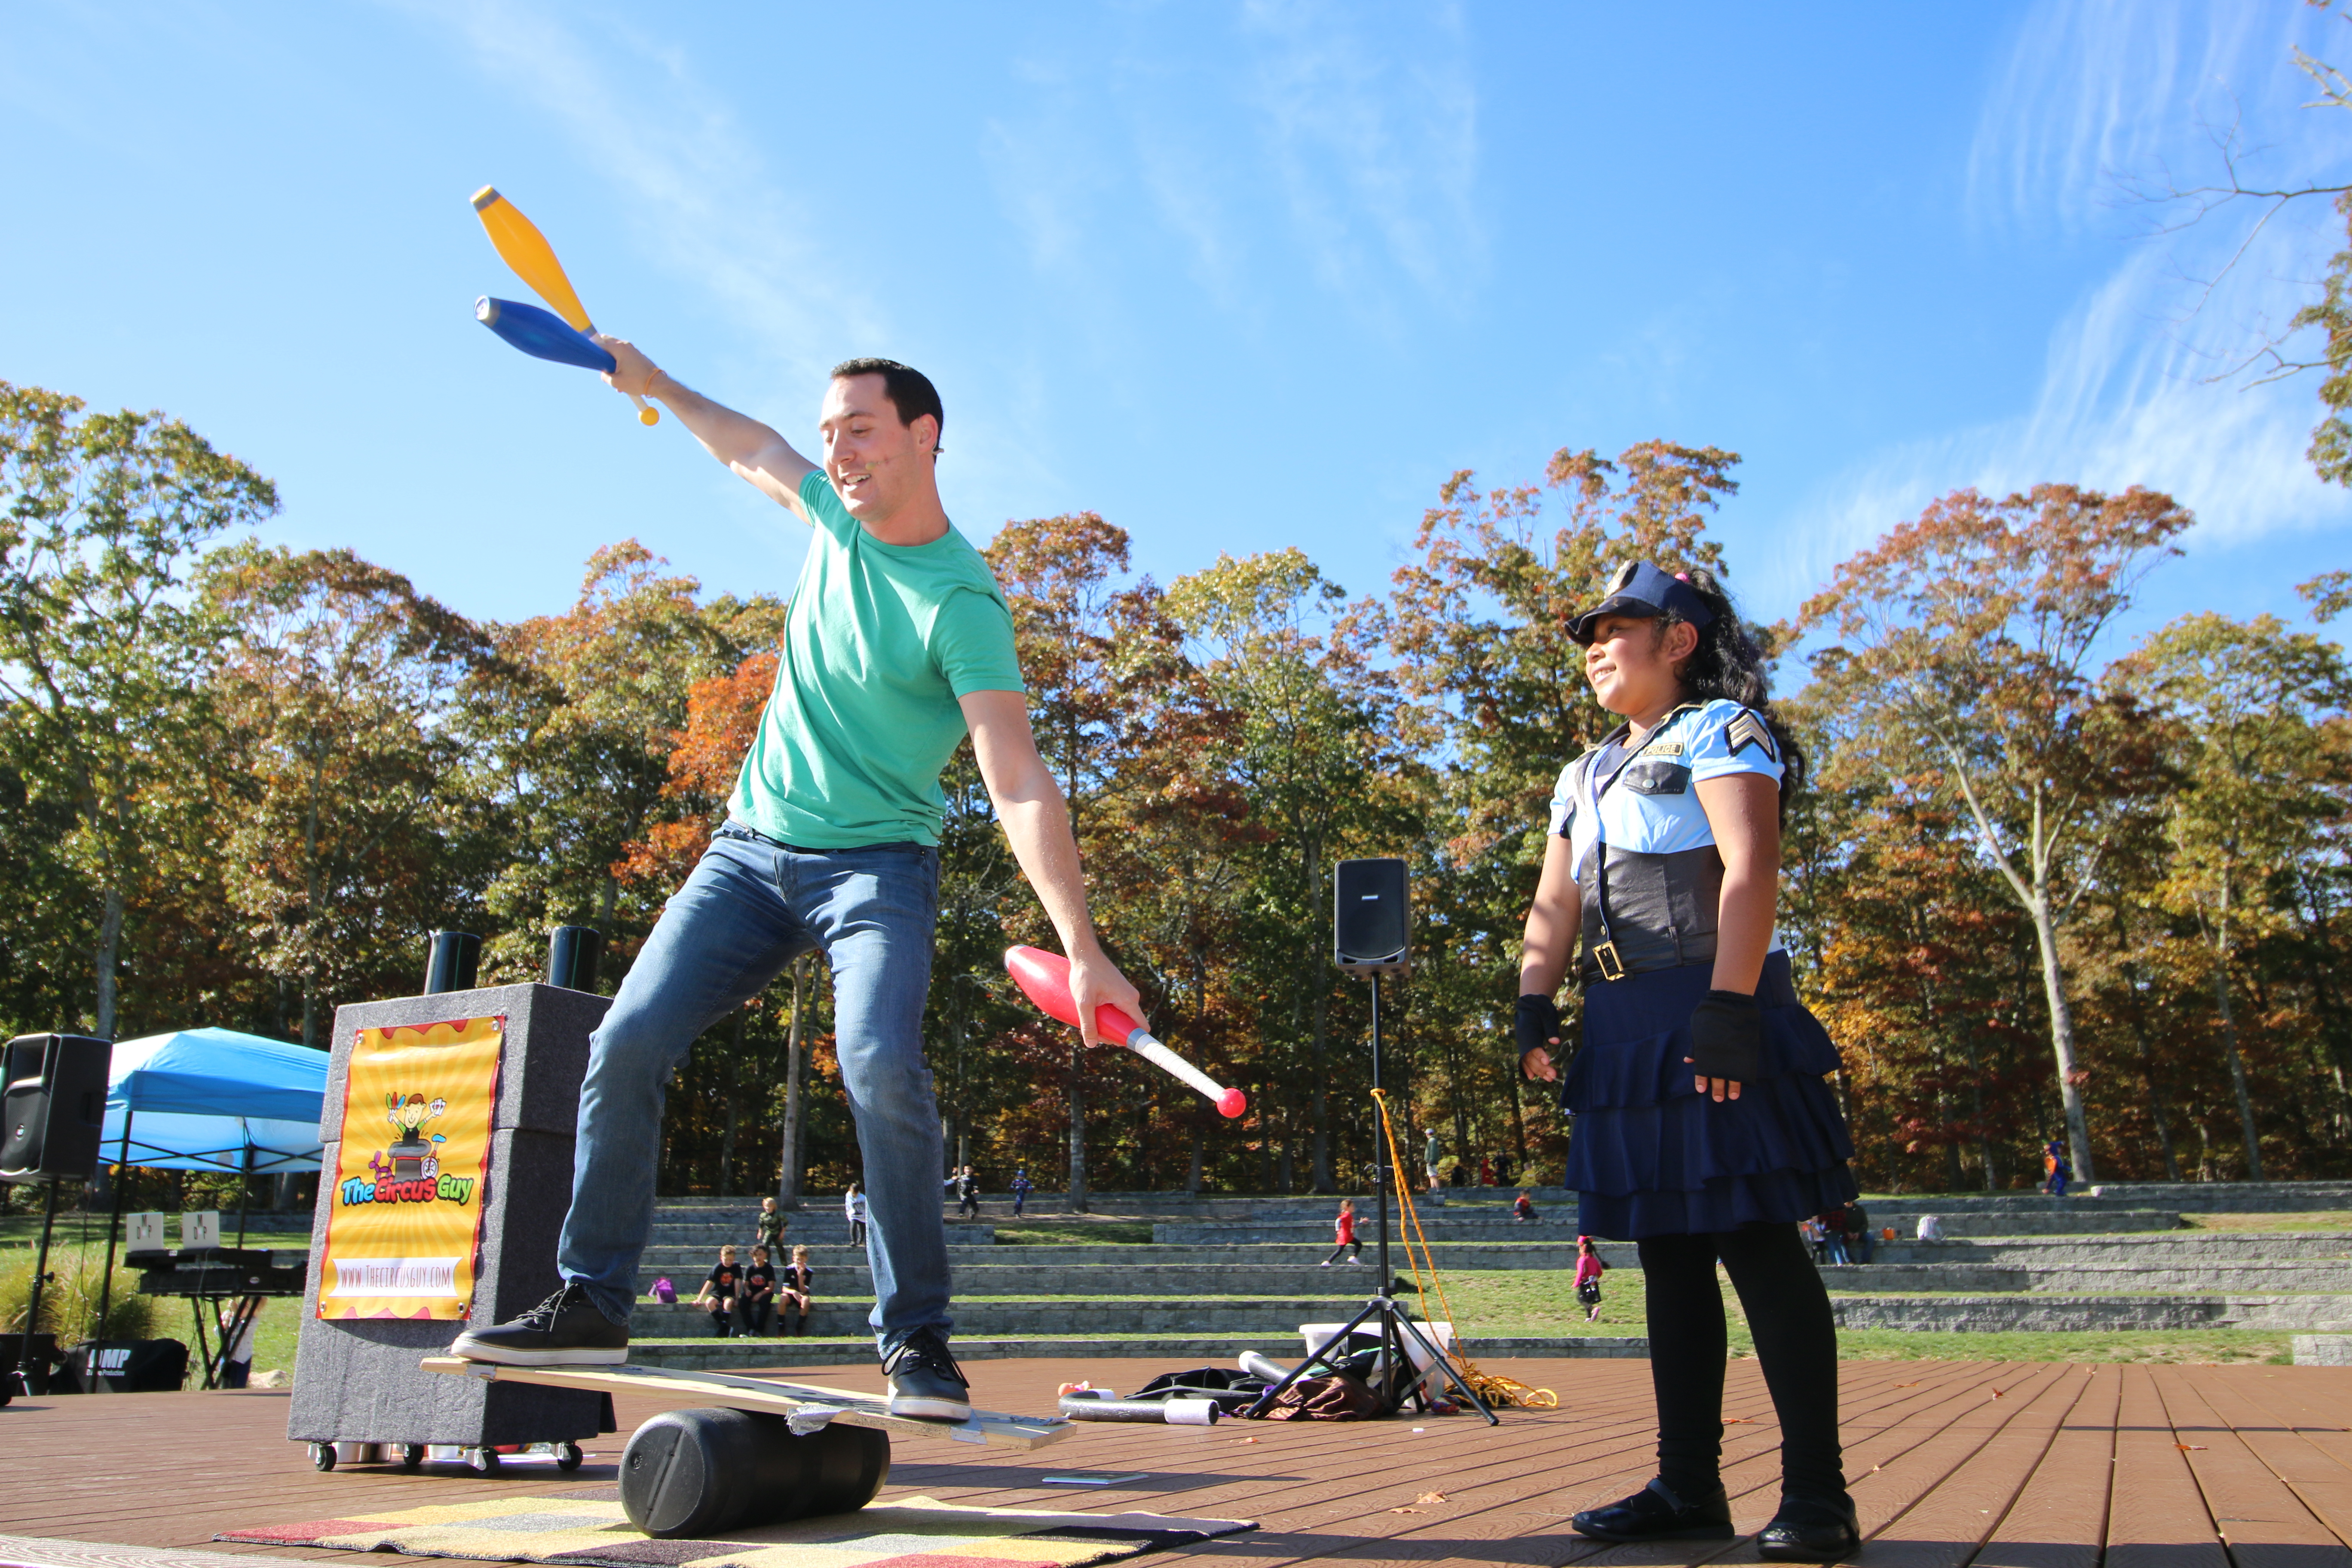 The Circus Guy and Kelsey Martinez perform at Good Ground Park on Saturday.